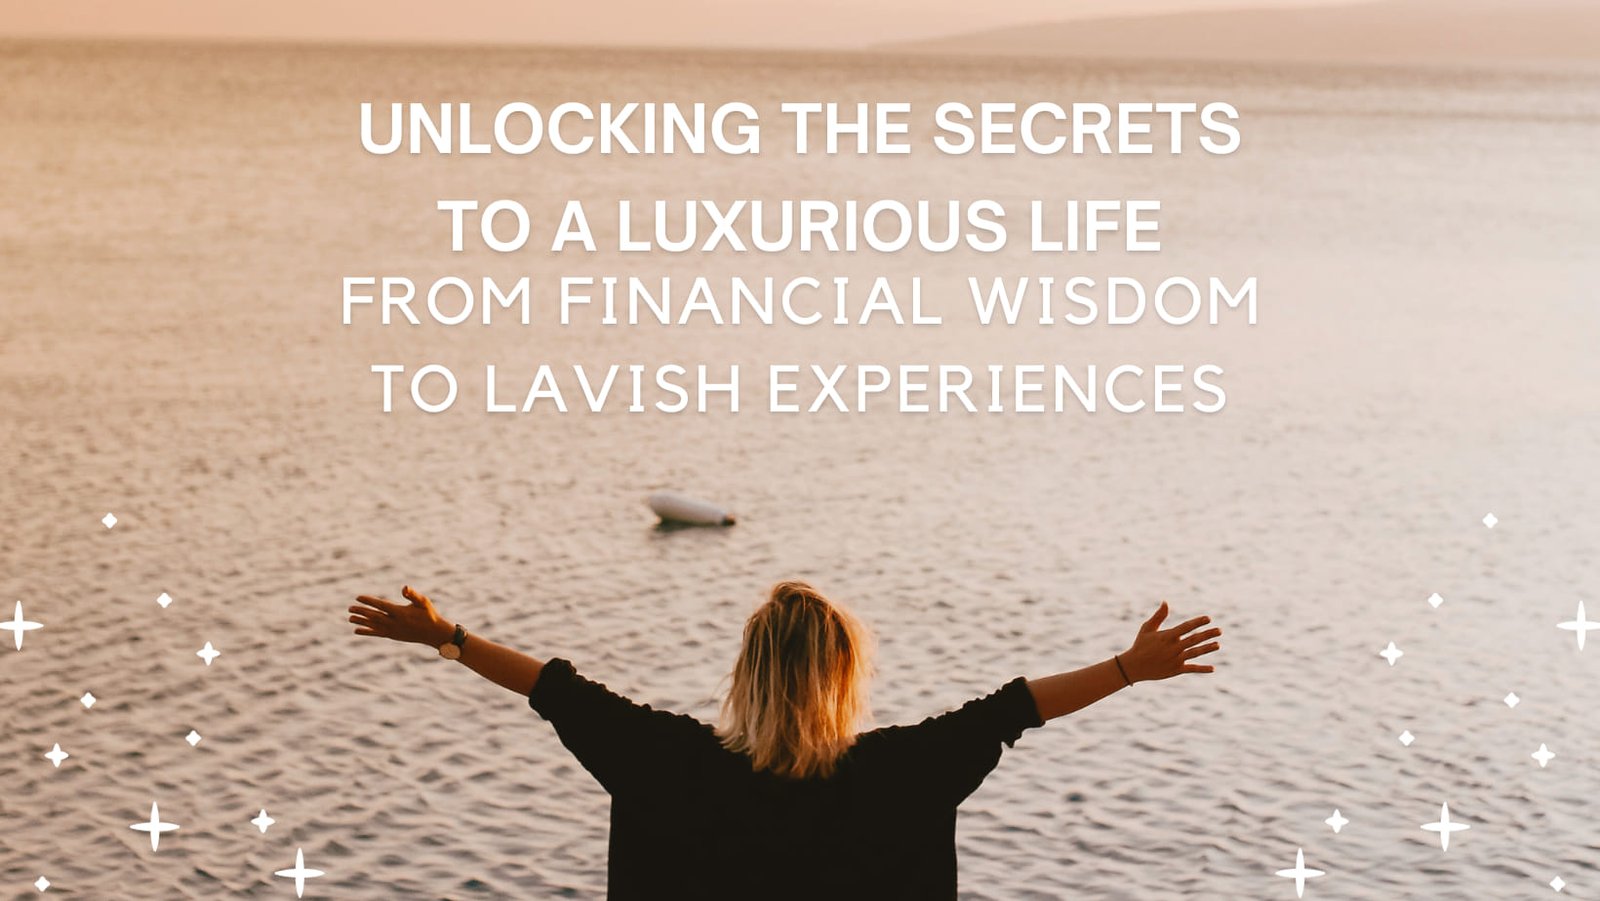 Unlocking the Secrets to a Luxurious Life: From Financial Wisdom to Lavish Experiences